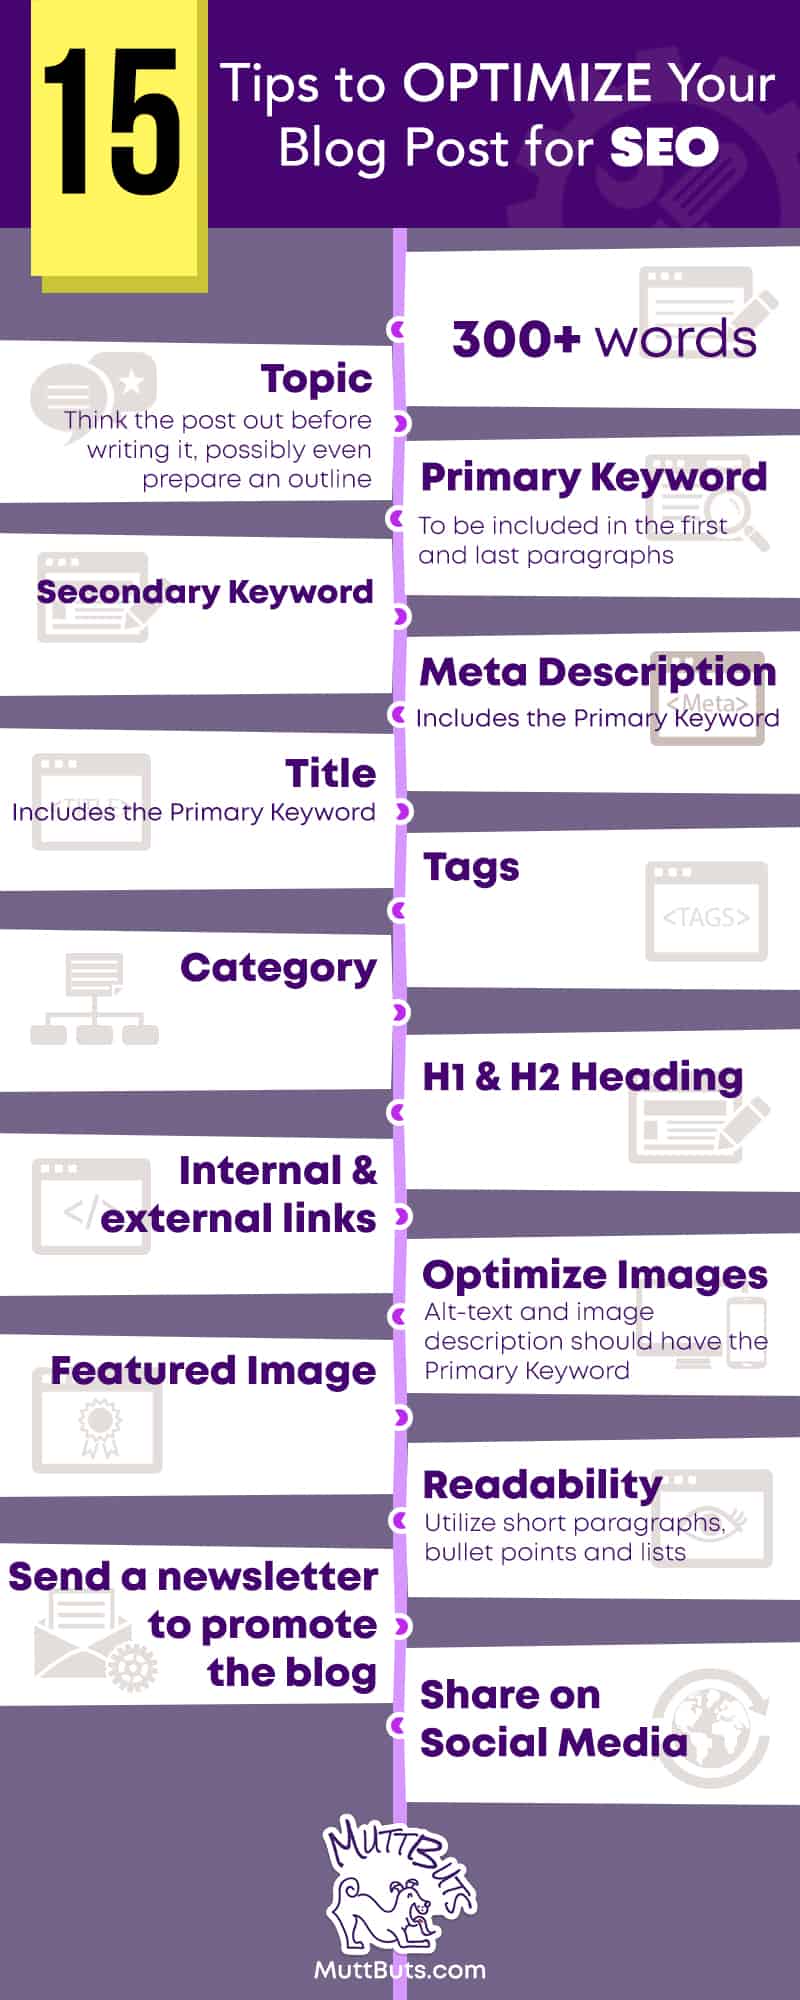 Infographic 15 Tips to Optimize Your Blog Post for SEO